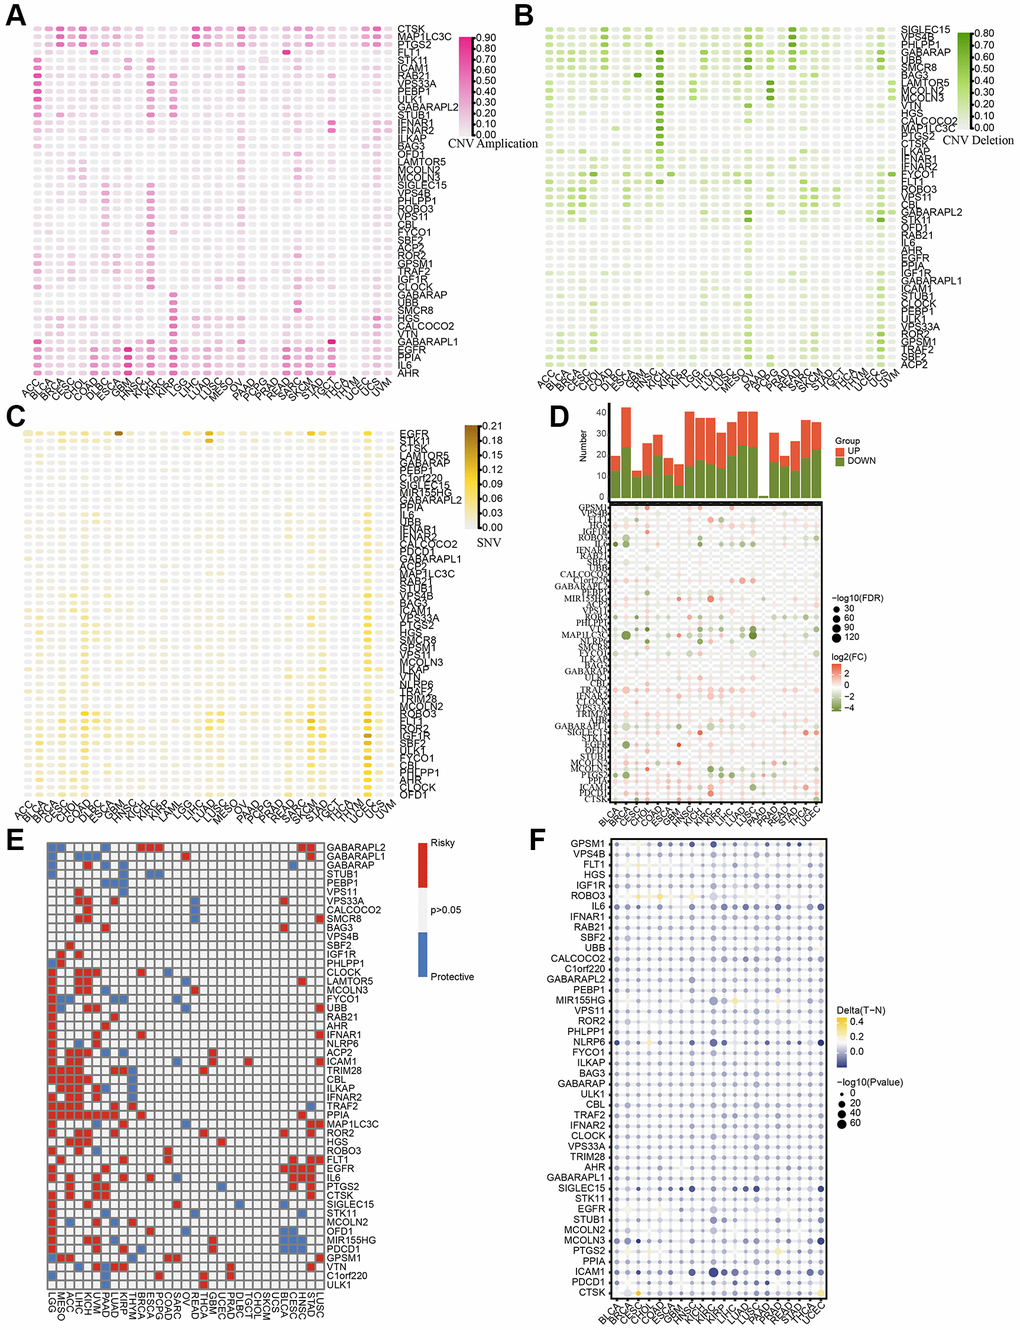 Pan-cancer characteristics of 50 LDCD-RGs. (A, B) Depiction of CNV mutations (gain and loss frequencies) within the cohort of LDCD-RGs manifesting in human tumors. (C) Heatmap was utilized to depict the SNV data of the LDCD-RGs in human tumors. (D) Depiction of mRNA expression magnitudes for LDCD-RGs. (E) Survival landscape assessment was performed on the set of LDCD-RG in human cancers. Genes displaying a P-value exceeding 0.05 are depicted in white, blue represents protective, red represents risk. (F) The methylation landscape governing LDCD-RGs in human tumors. Abbreviations: LDCD-RGs: LDCD-related genes; CNV: Copy Number Variation.